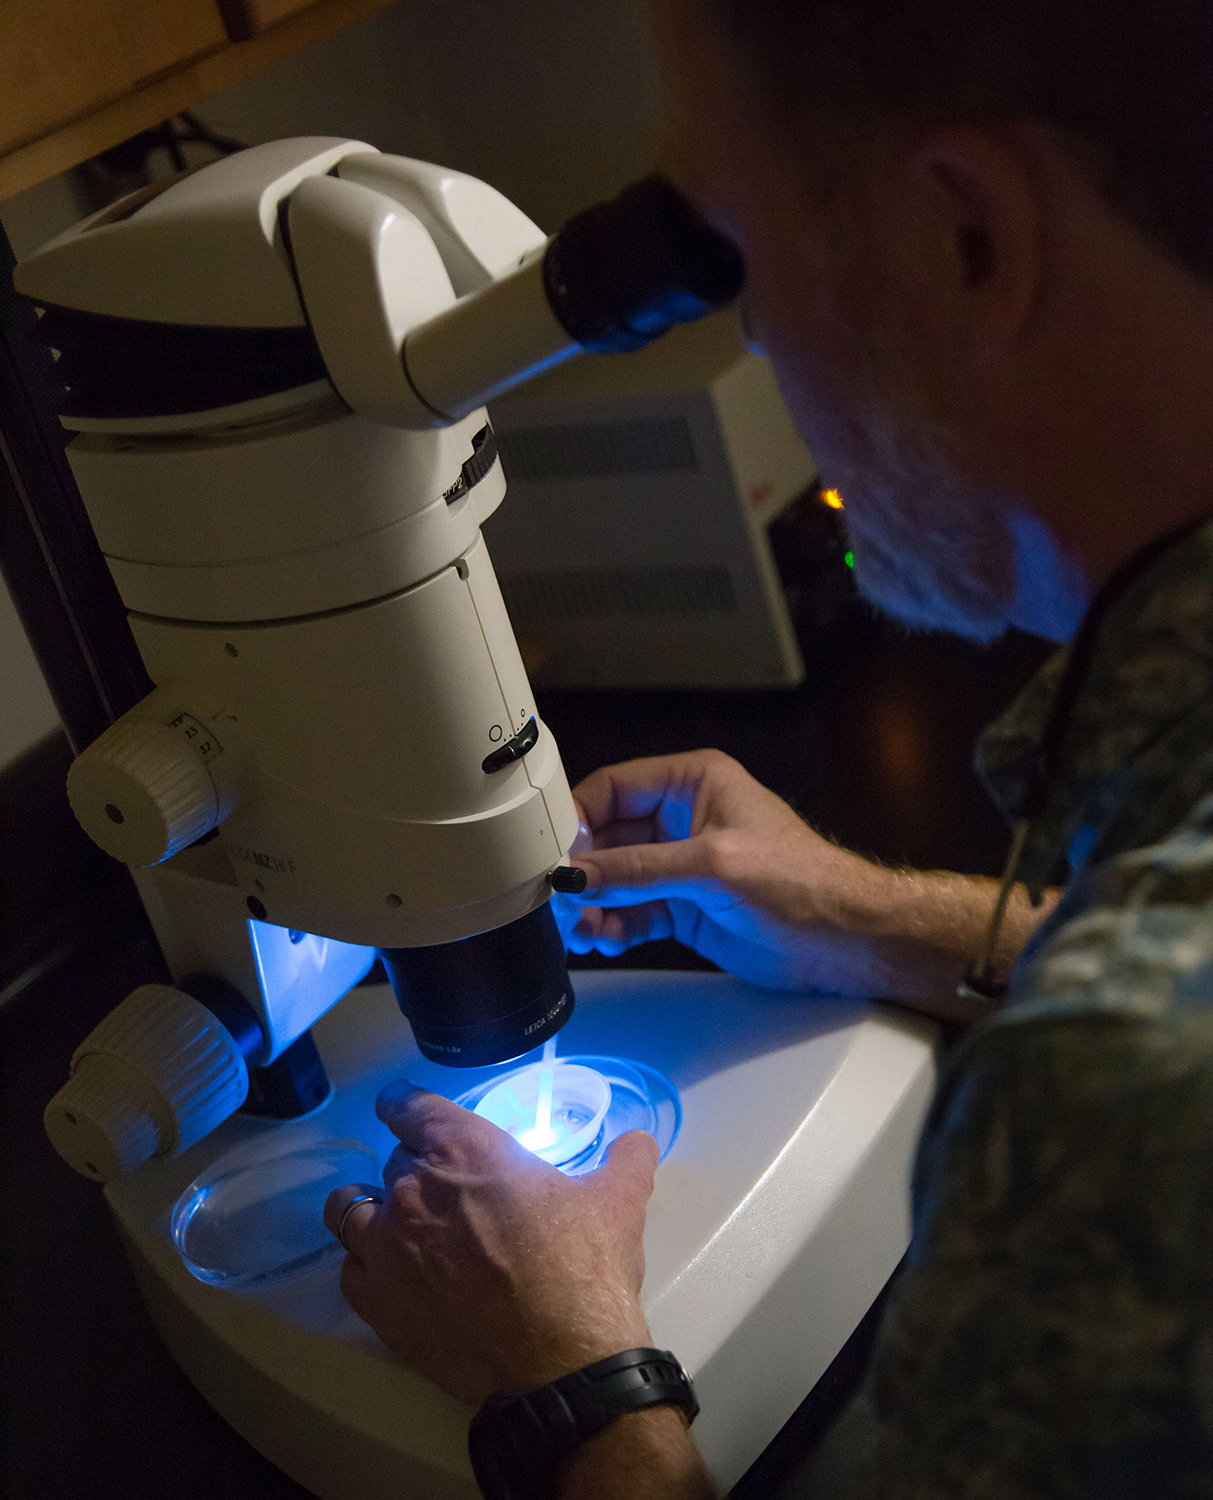 Bruce Draper examines zebrafish under a microscope equipped with an ultraviolet light to reveal fluorescent gonad tissues. David Slipher/UC Davis